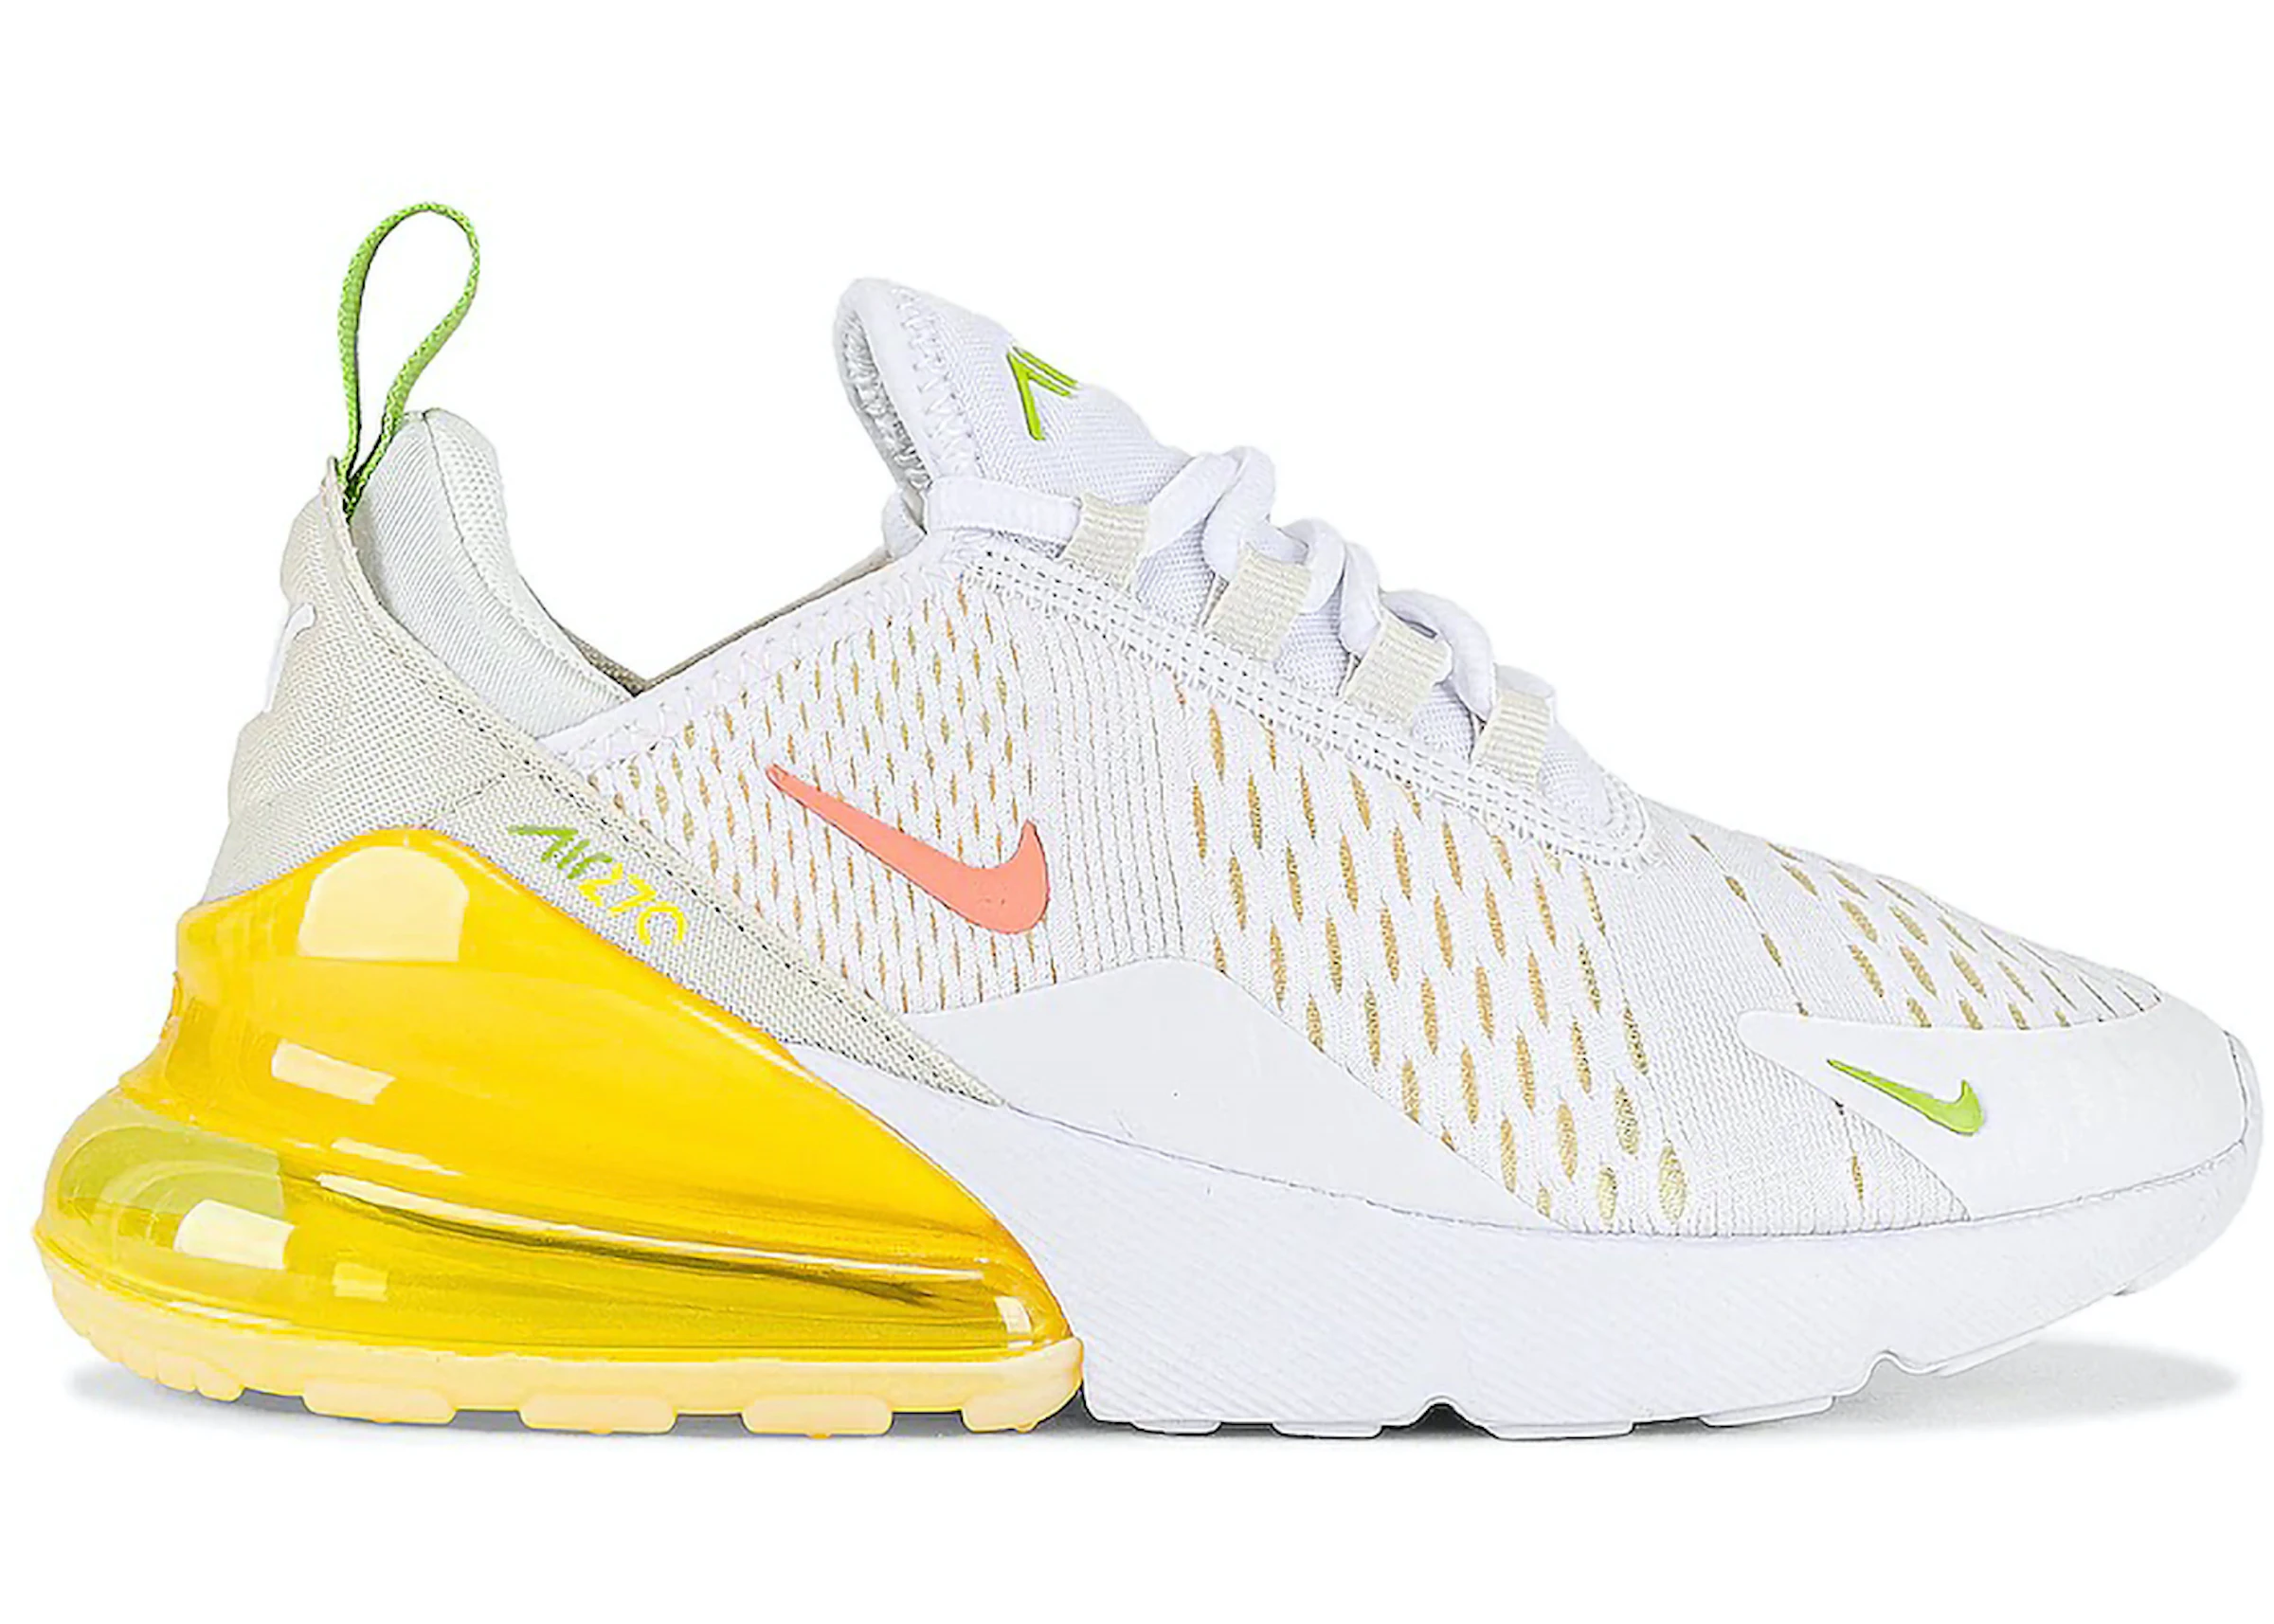 Nike Air Max 270 Color Release Dates | lupon.gov.ph